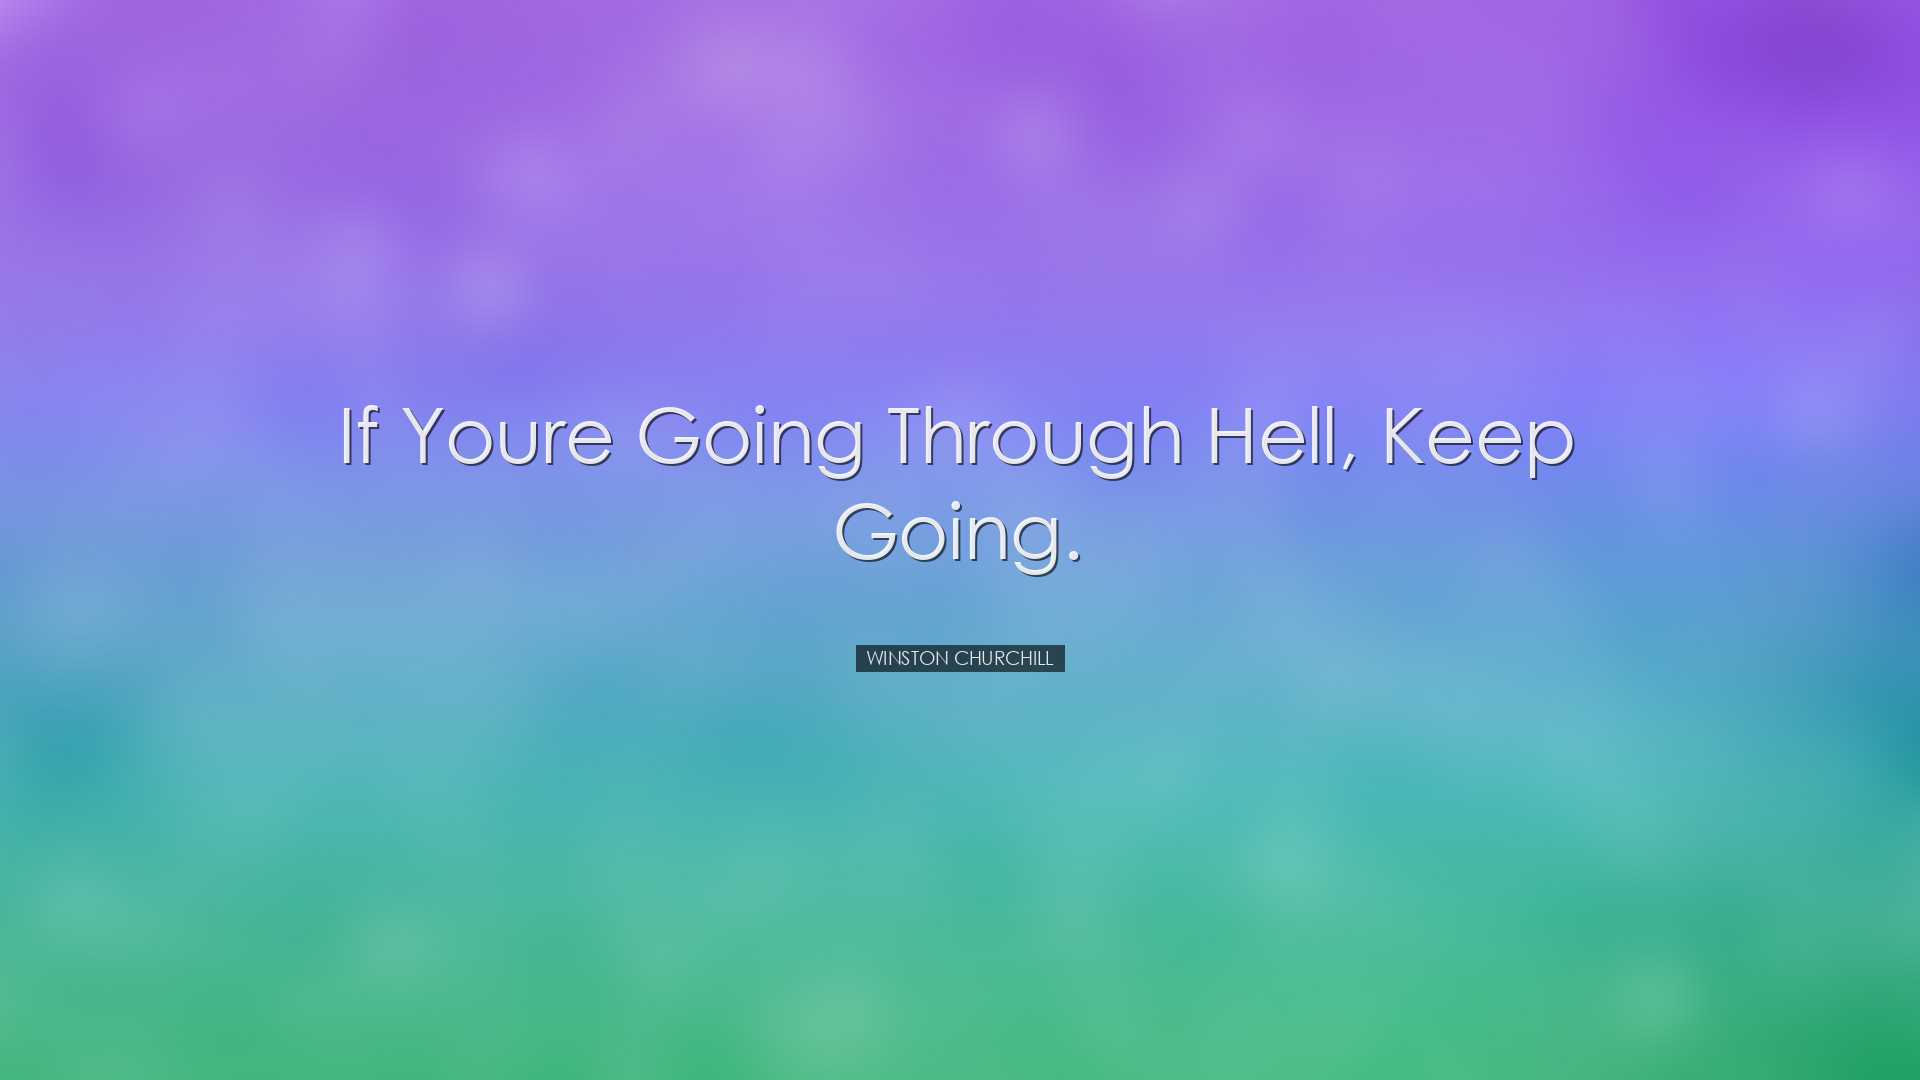 If youre going through hell, keep going. - Winston Churchill